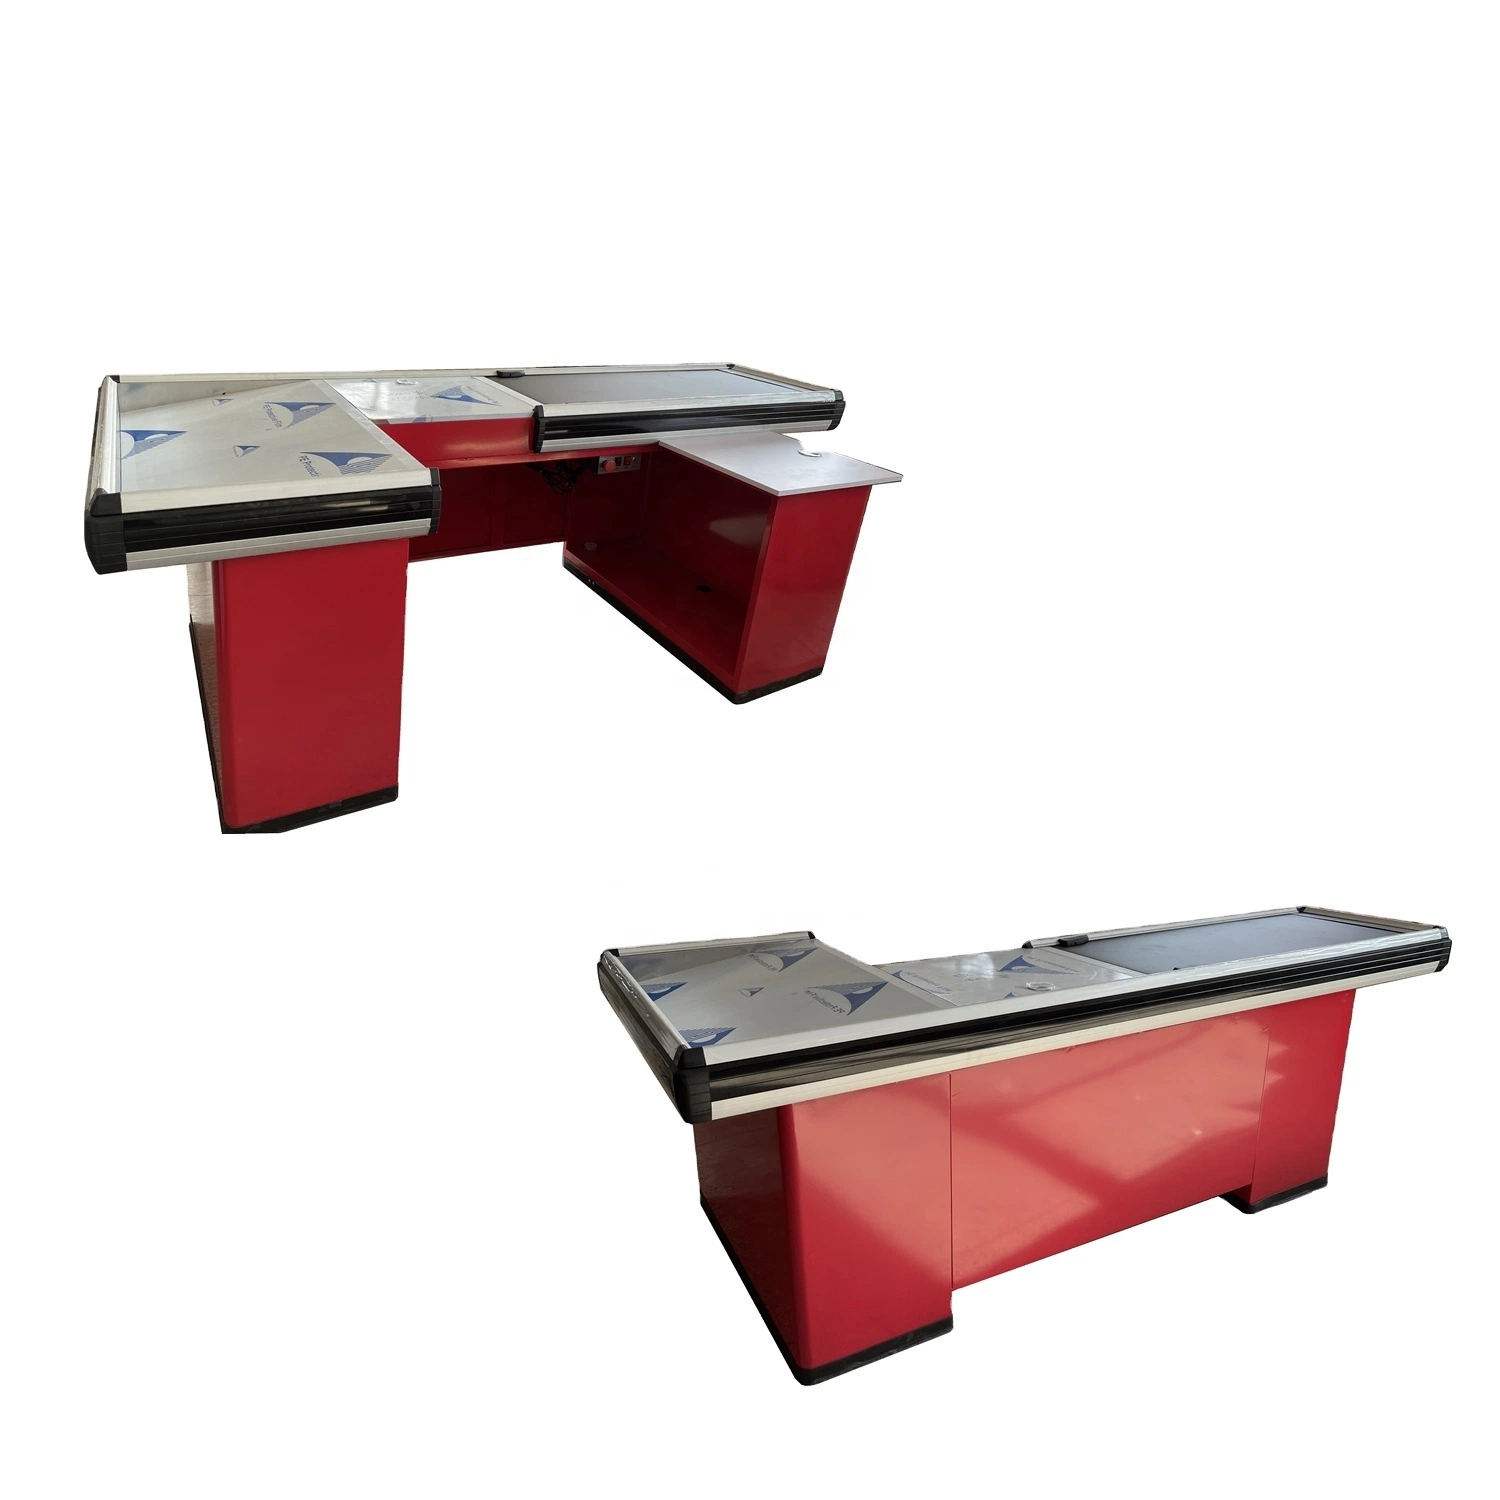 Motorized Cashier Counter for Supermarket Stainless Steel Electric Cash Register Supermarket Checkout Counter with Conveyor Belt